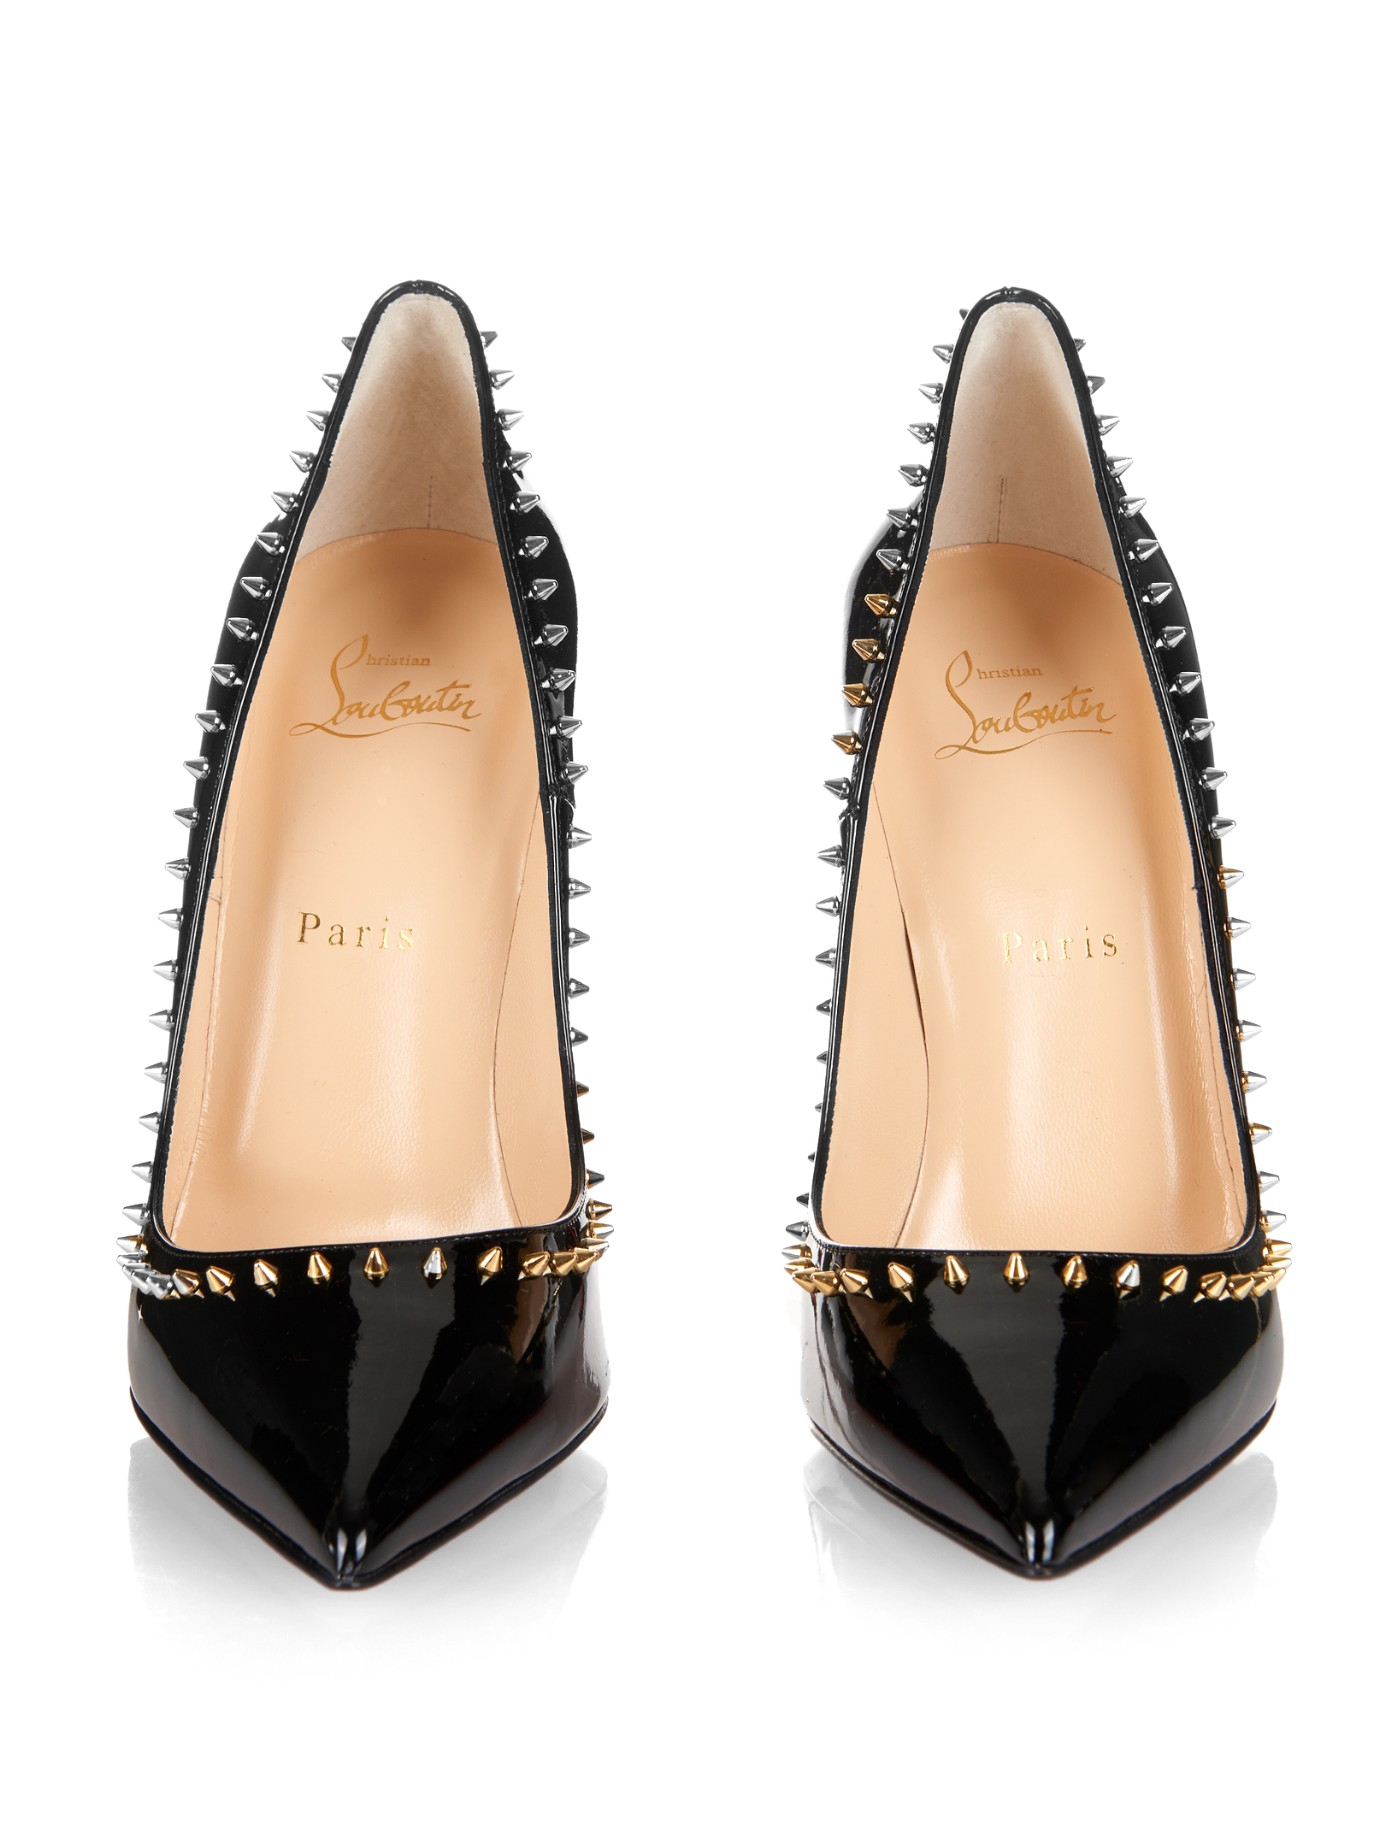 Christian Louboutin Anjalina Studded Patent Leather Pumps in Black 